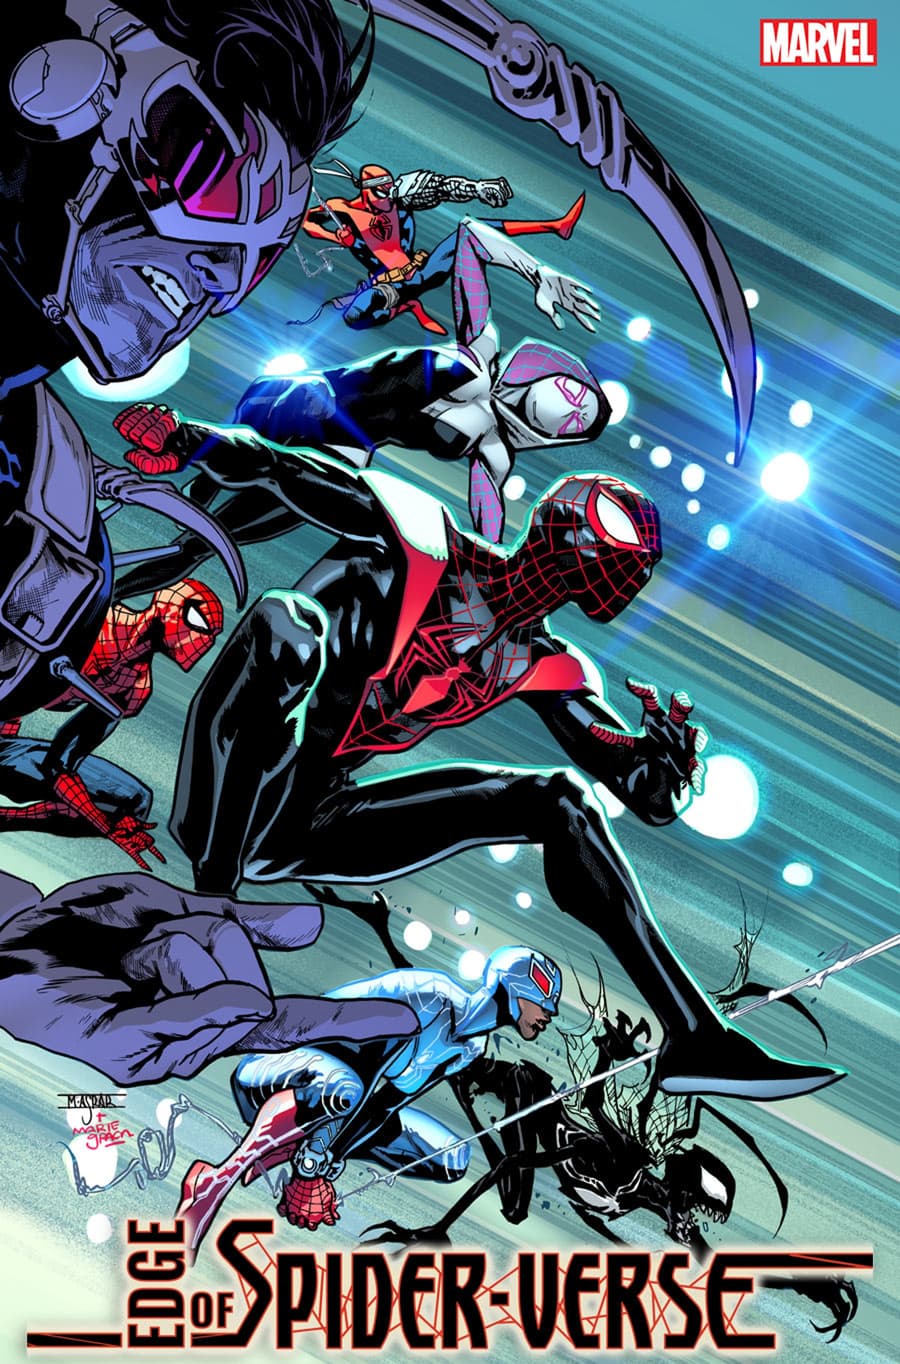 EDGE OF SPIDER-VERSE #1 Foil Variant Cover by Mahmud Asrar